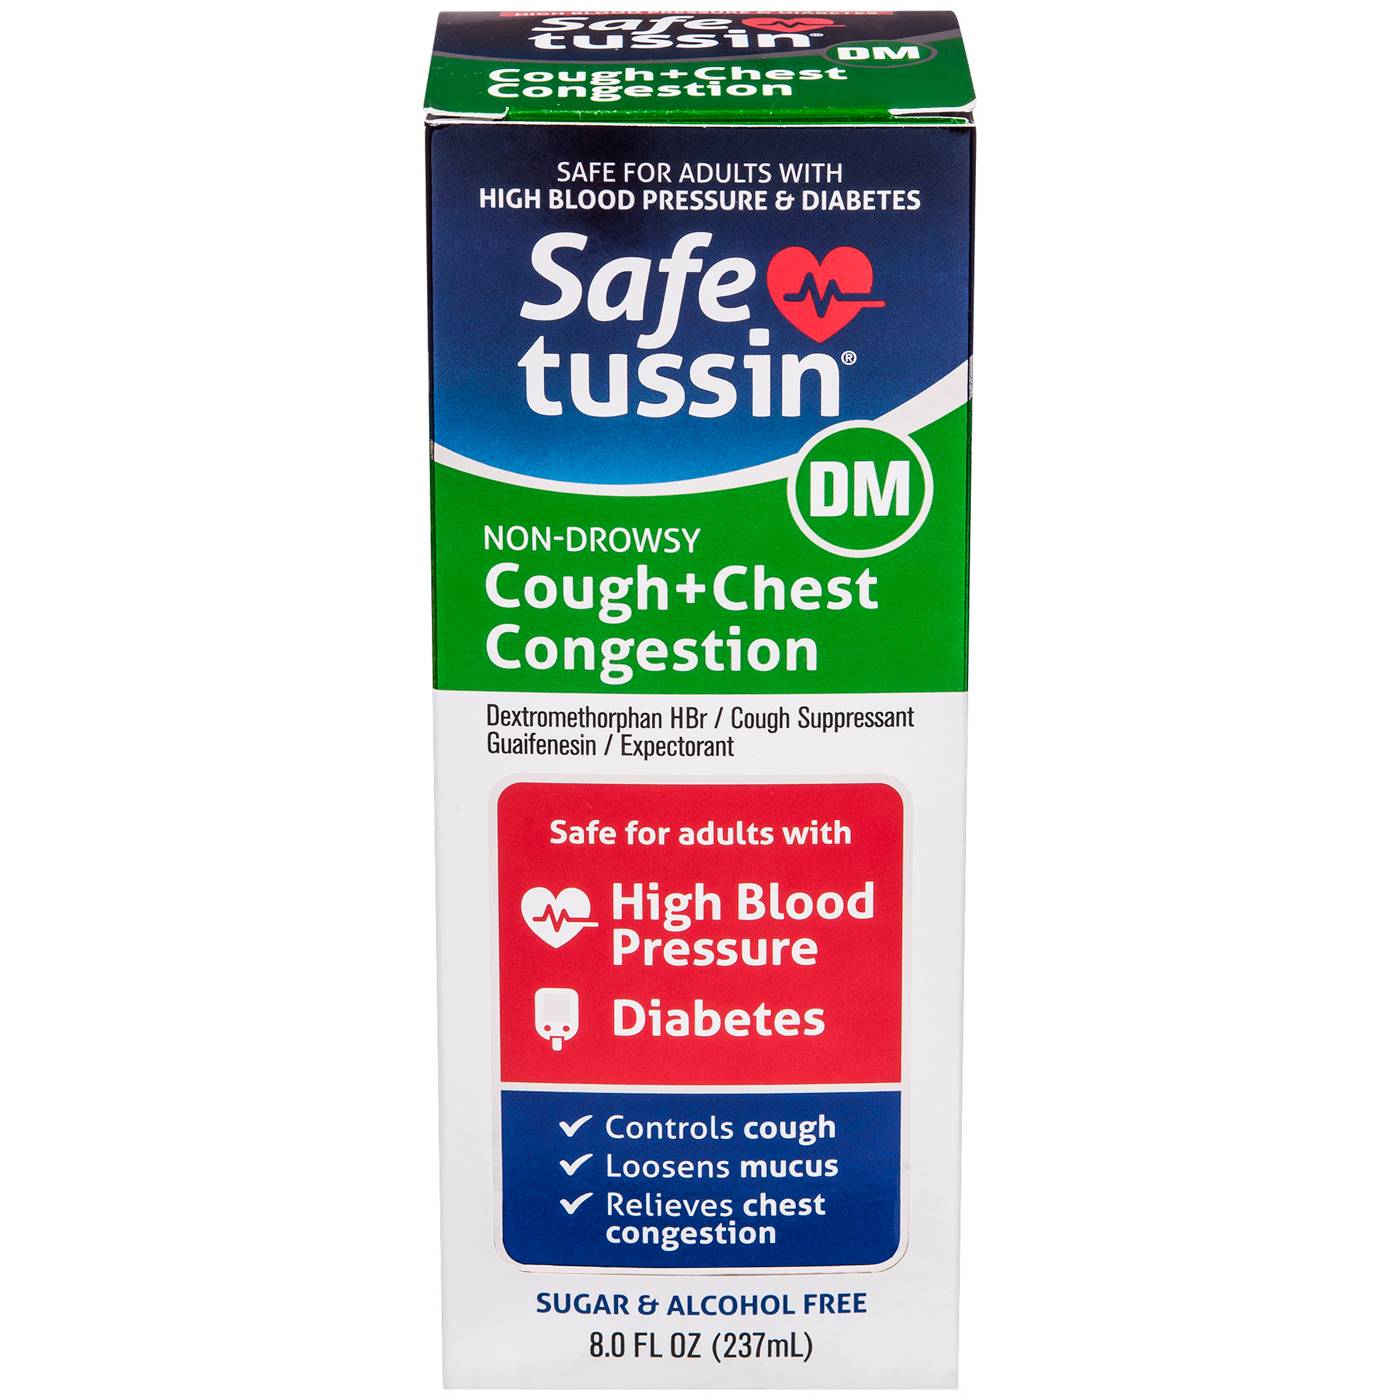 Safetussin DM Cough + Chest Congestion; image 1 of 2